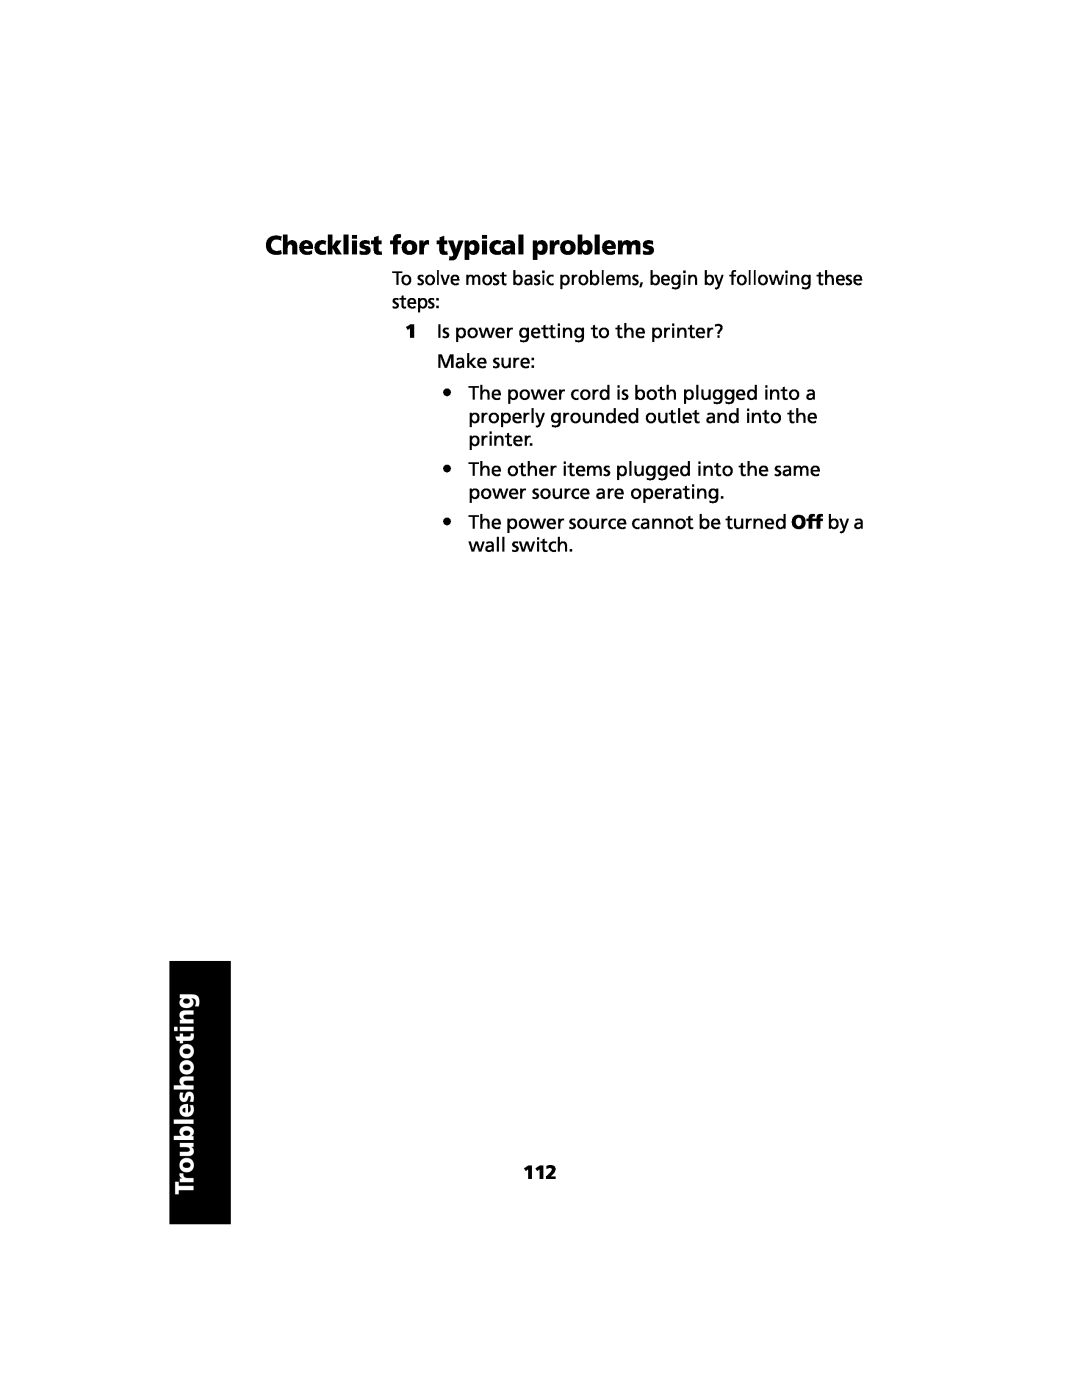 Lexmark 2480 Checklist for typical problems, Troubleshooting, To solve most basic problems, begin by following these steps 